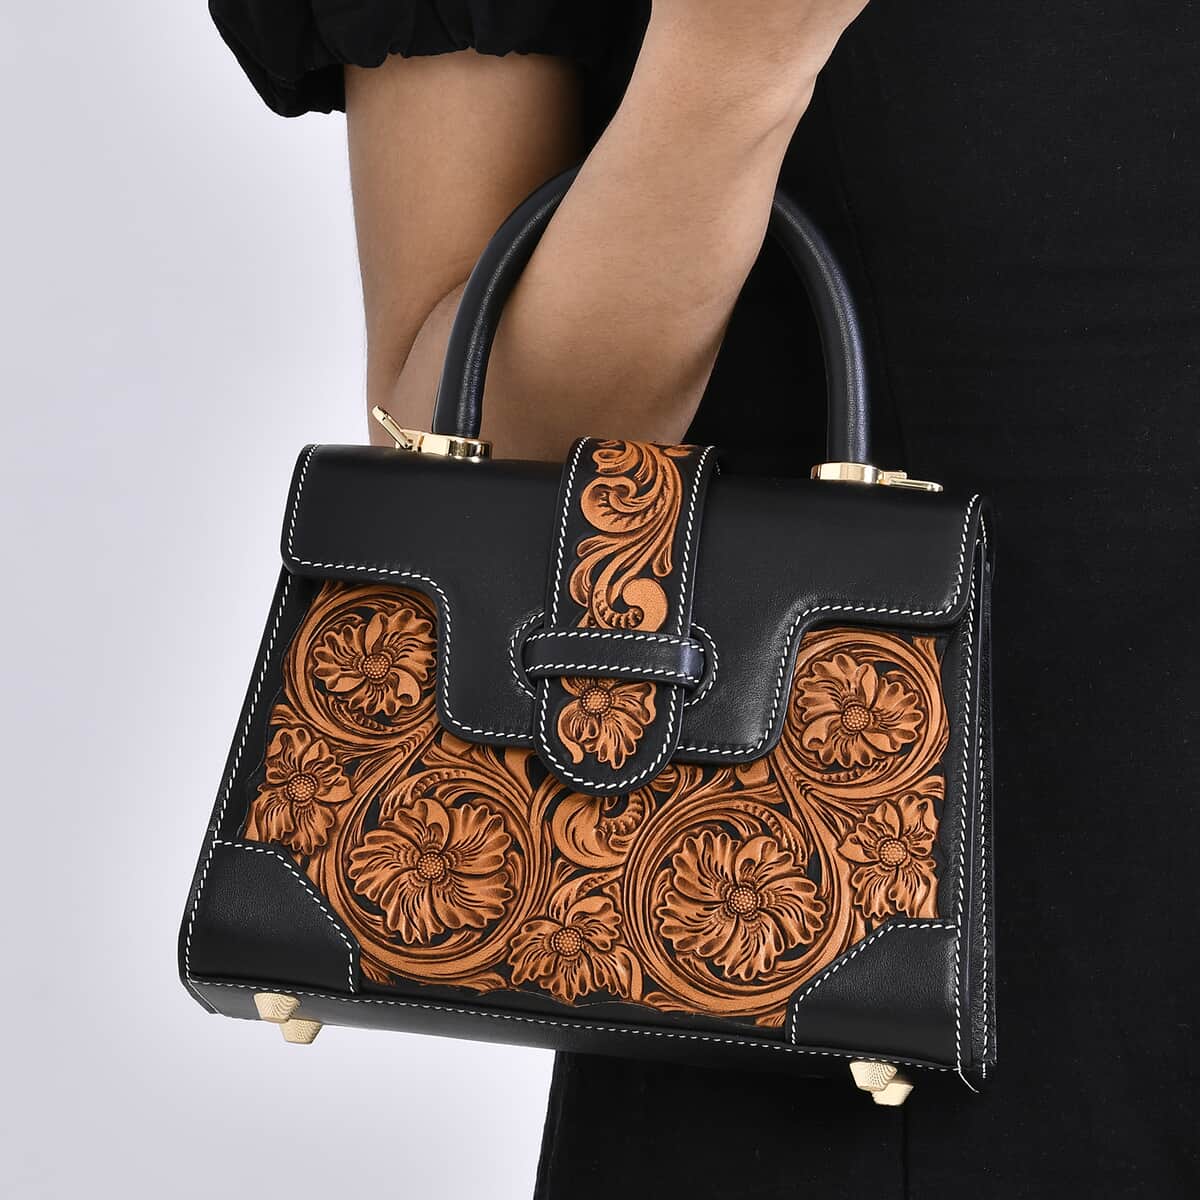 Grand Pelle Black with Solid Color Hand Engraving Flower Pattern Genuine Leather Crossbody Bag (9"x6.5"x3.7") with Handle Drop and Shoulder Strap image number 2